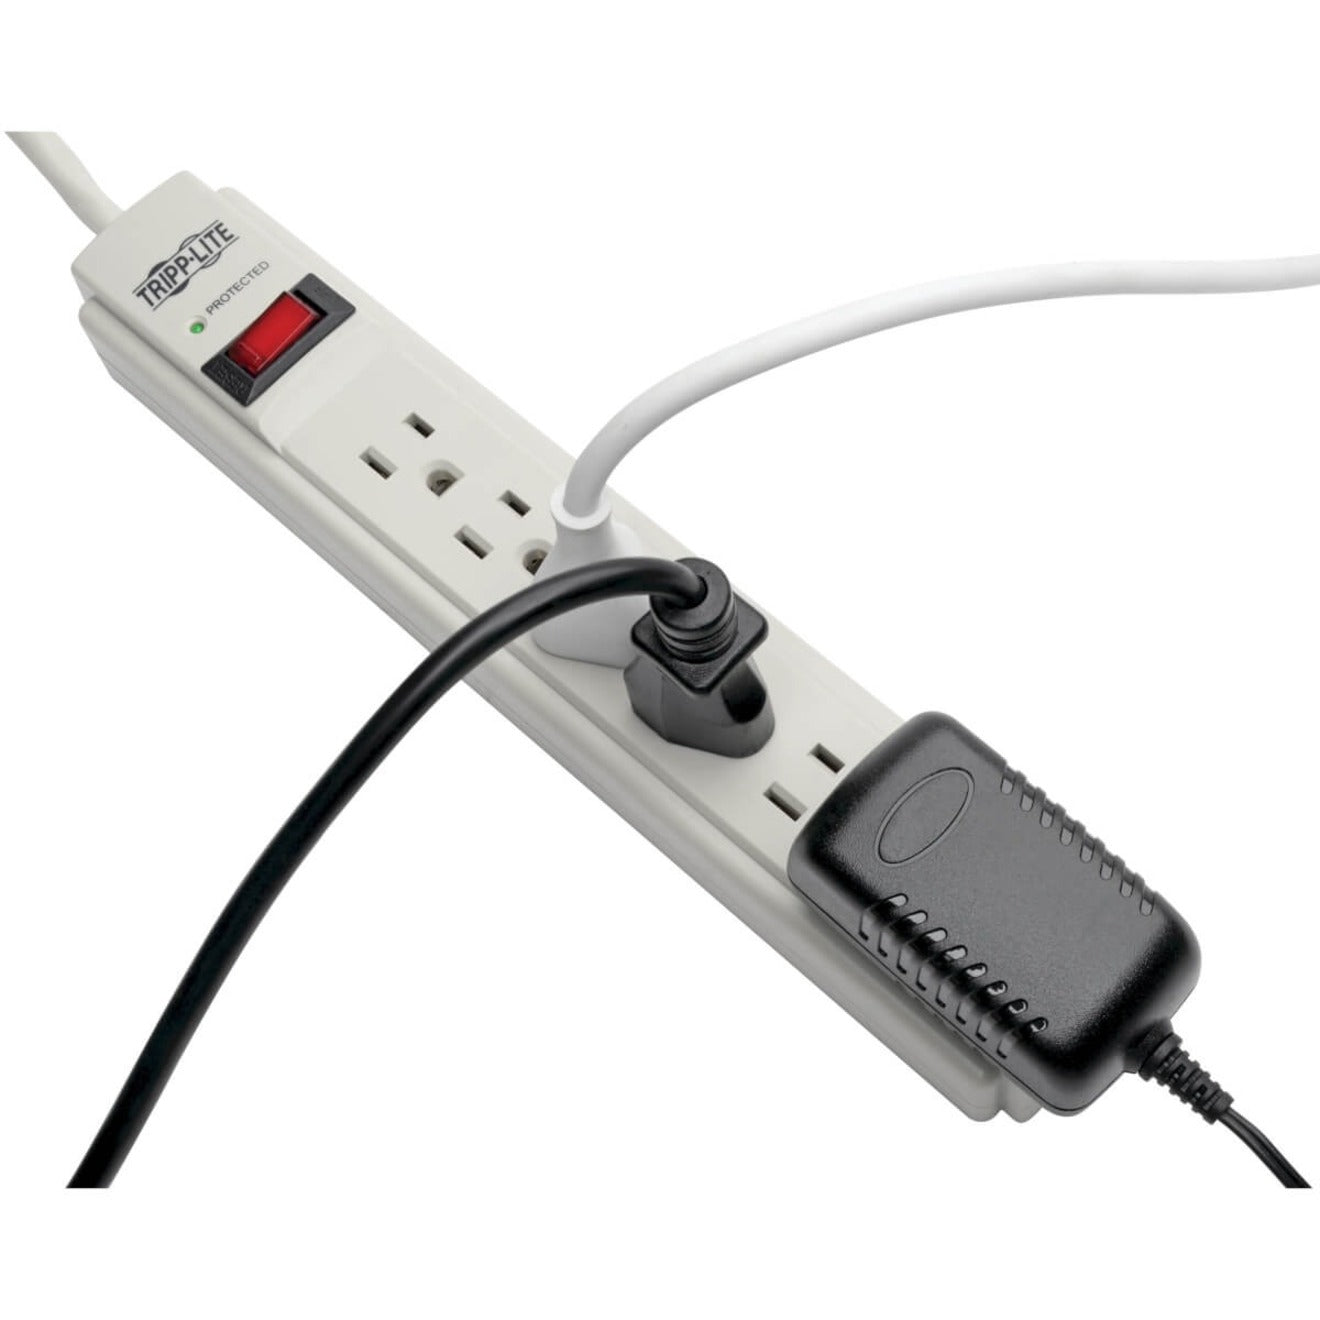 Tripp Lite TLP615 Protect It! 6-Outlet Surge Suppressor, 790 Joules, 15' Cord, White